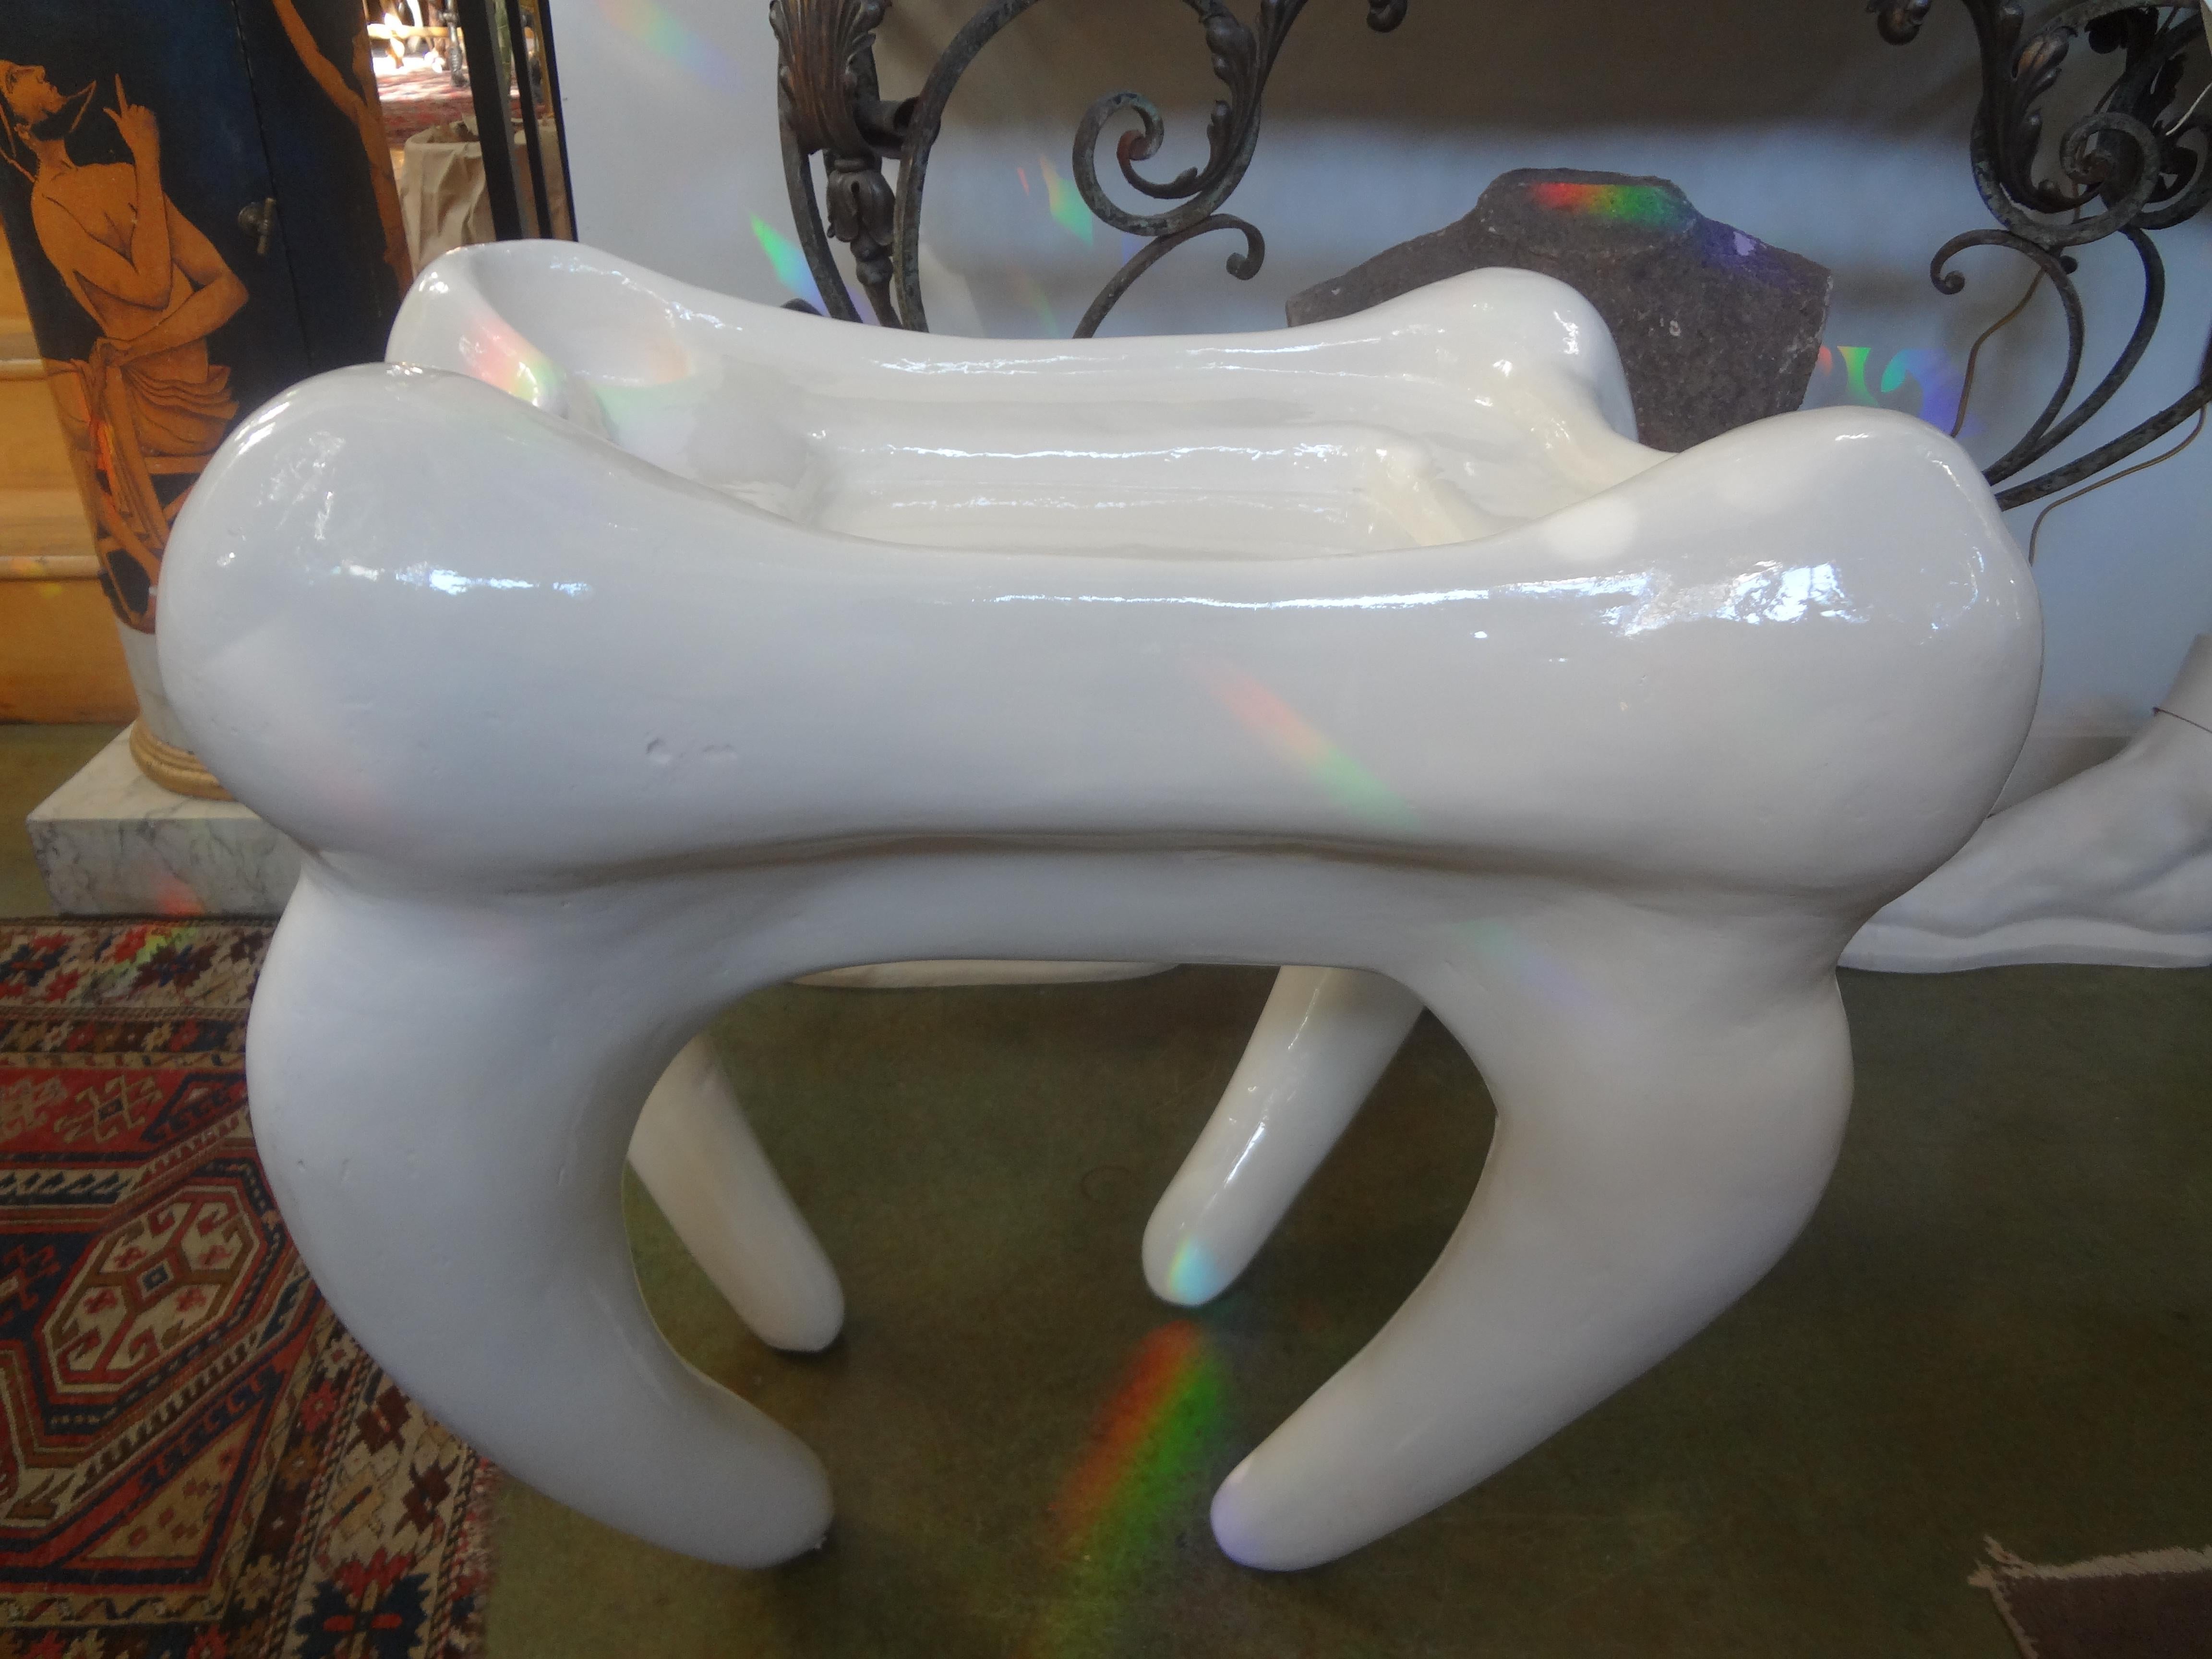 Postmodern plaster table in the shape of a molar.
Stunning one of a kind postmodern plaster table in the shape of a molar tooth. This unique midcentury John Dickinson style table in a white lacquered finish is both interesting and function able.